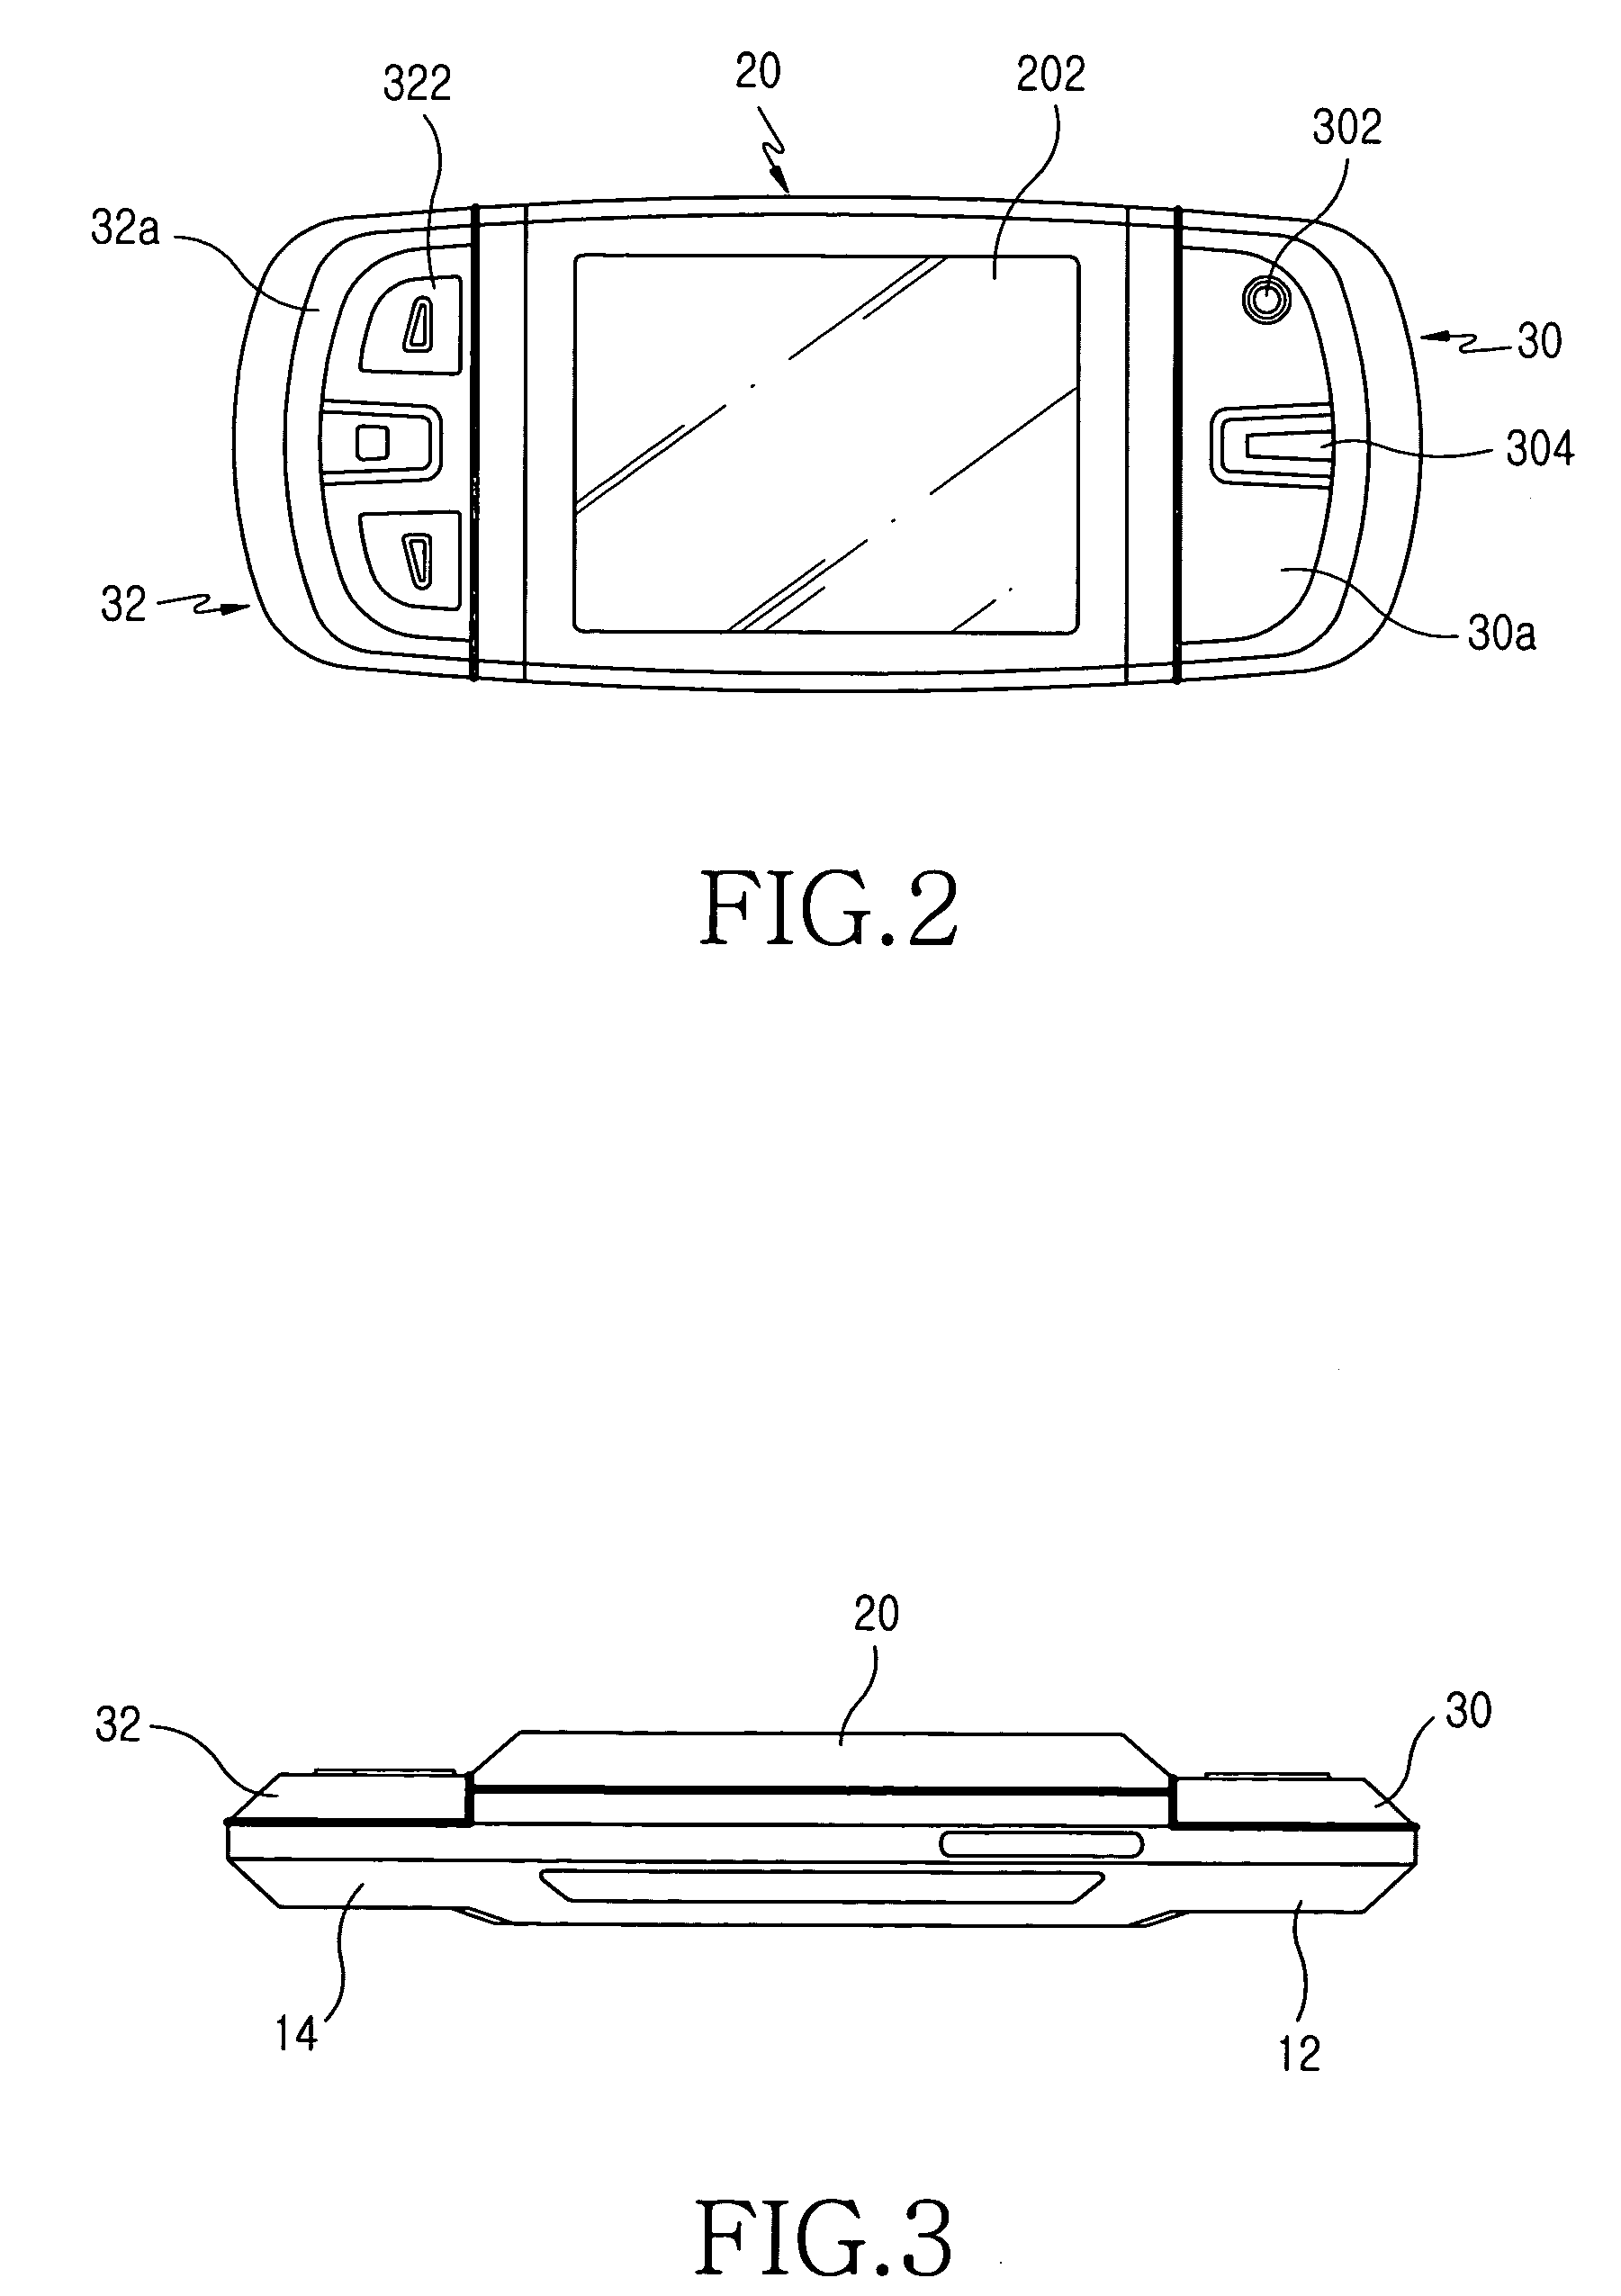 Portable digital communication device usable as a gaming device and a personal digital assistant (PDA)